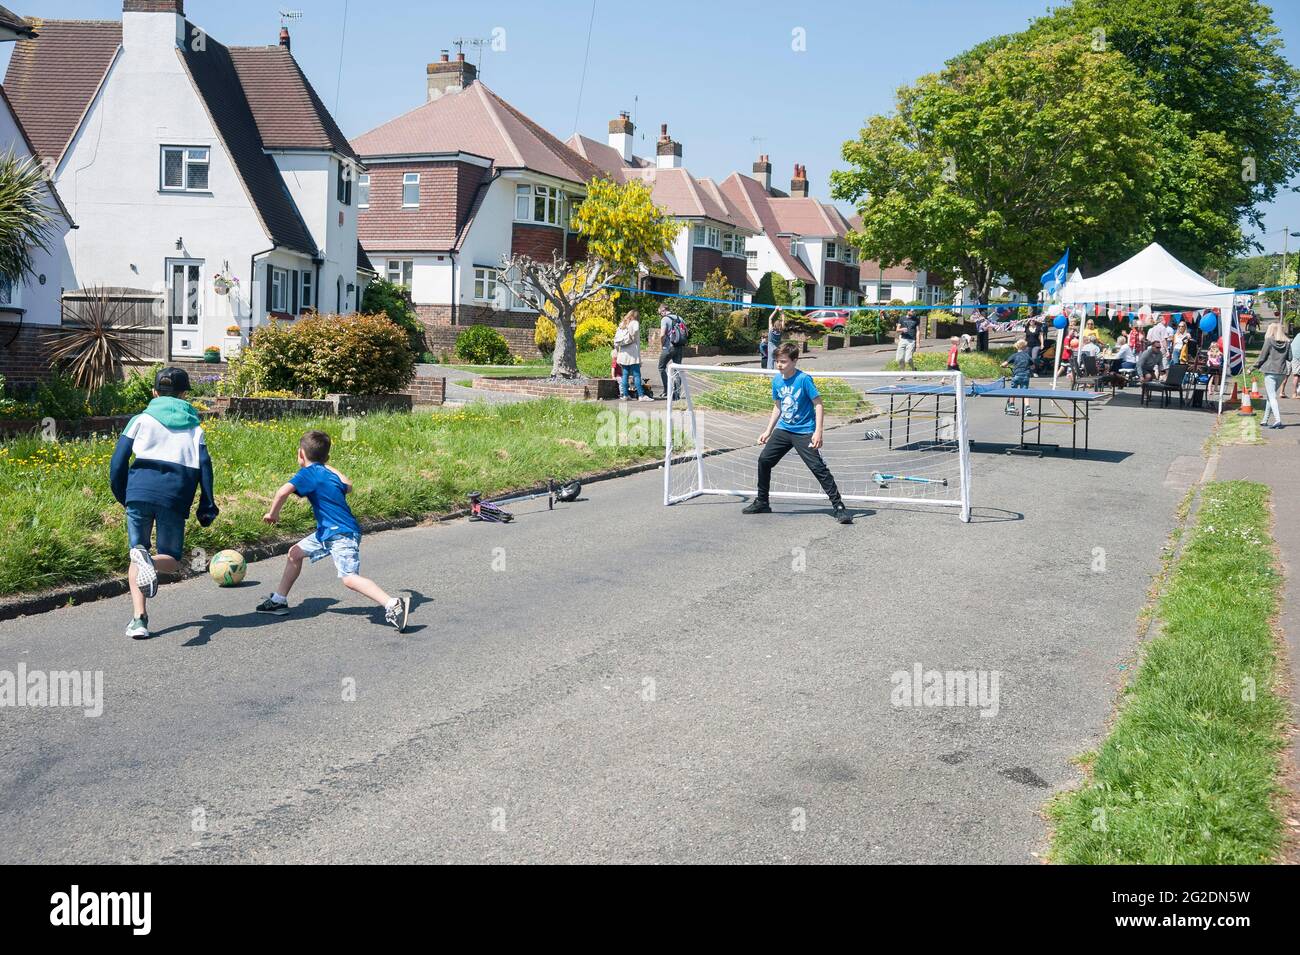 A Royal Wedding street party for harry and meghan's wedding in Shoreham by Sea, West Sussex Stock Photo